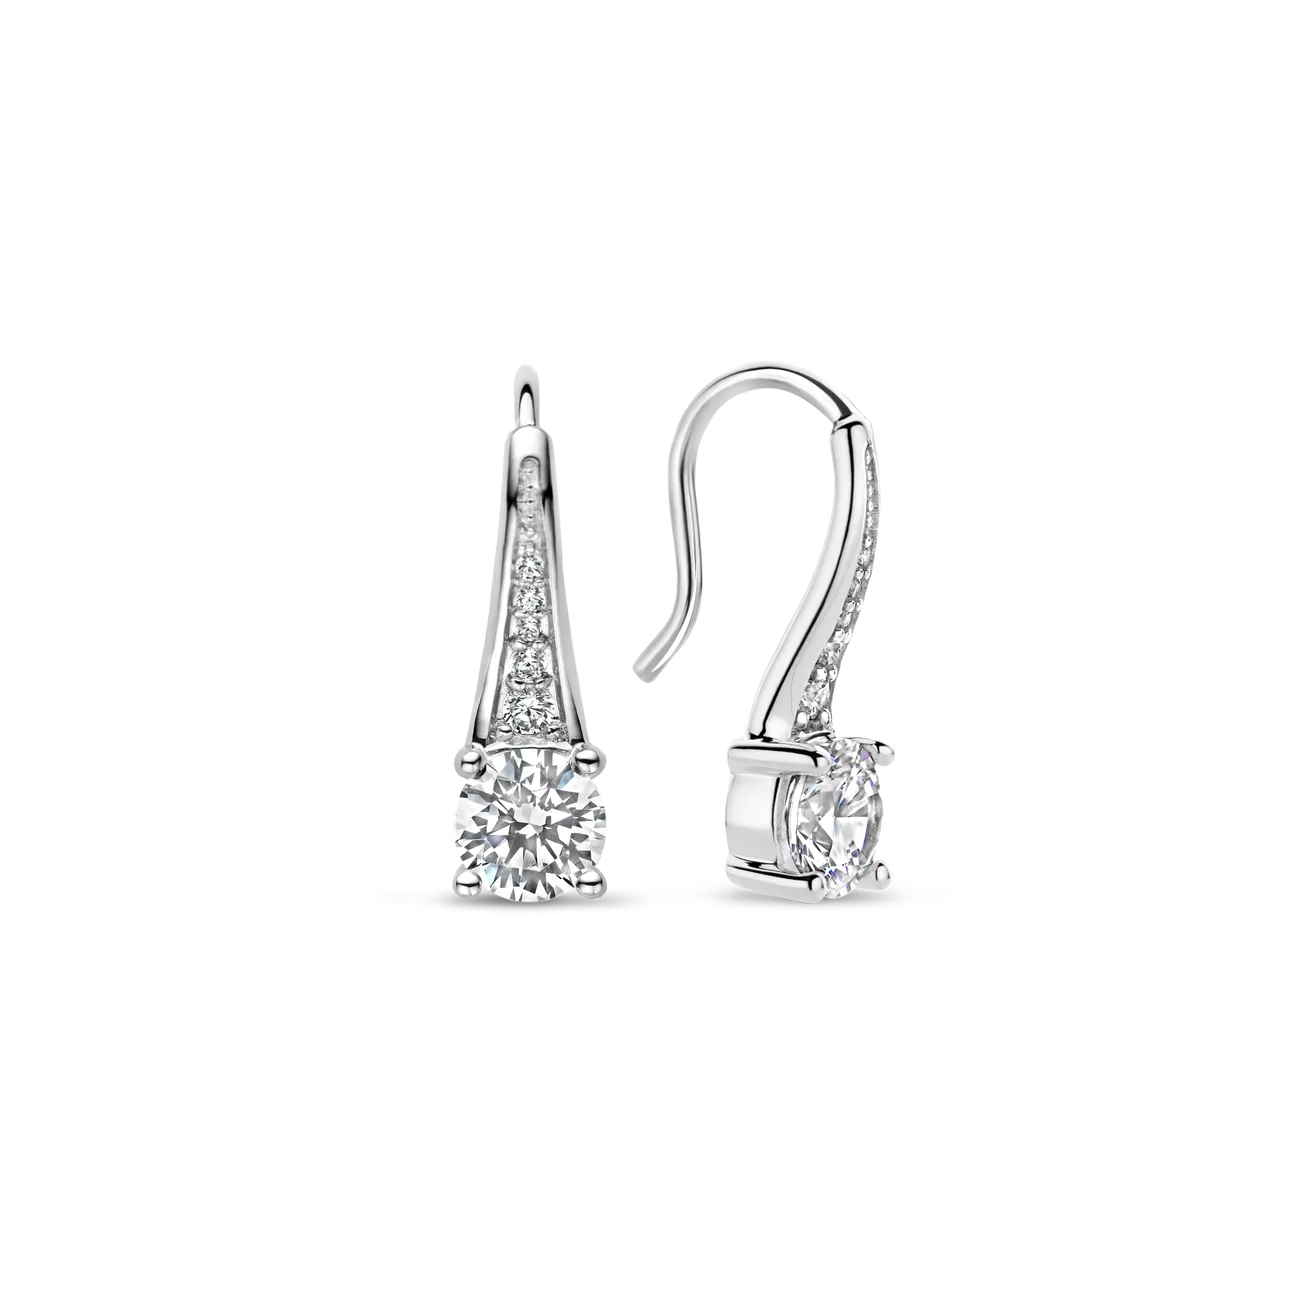 Ti Sento Silver Hook Earrings with CZ - Small